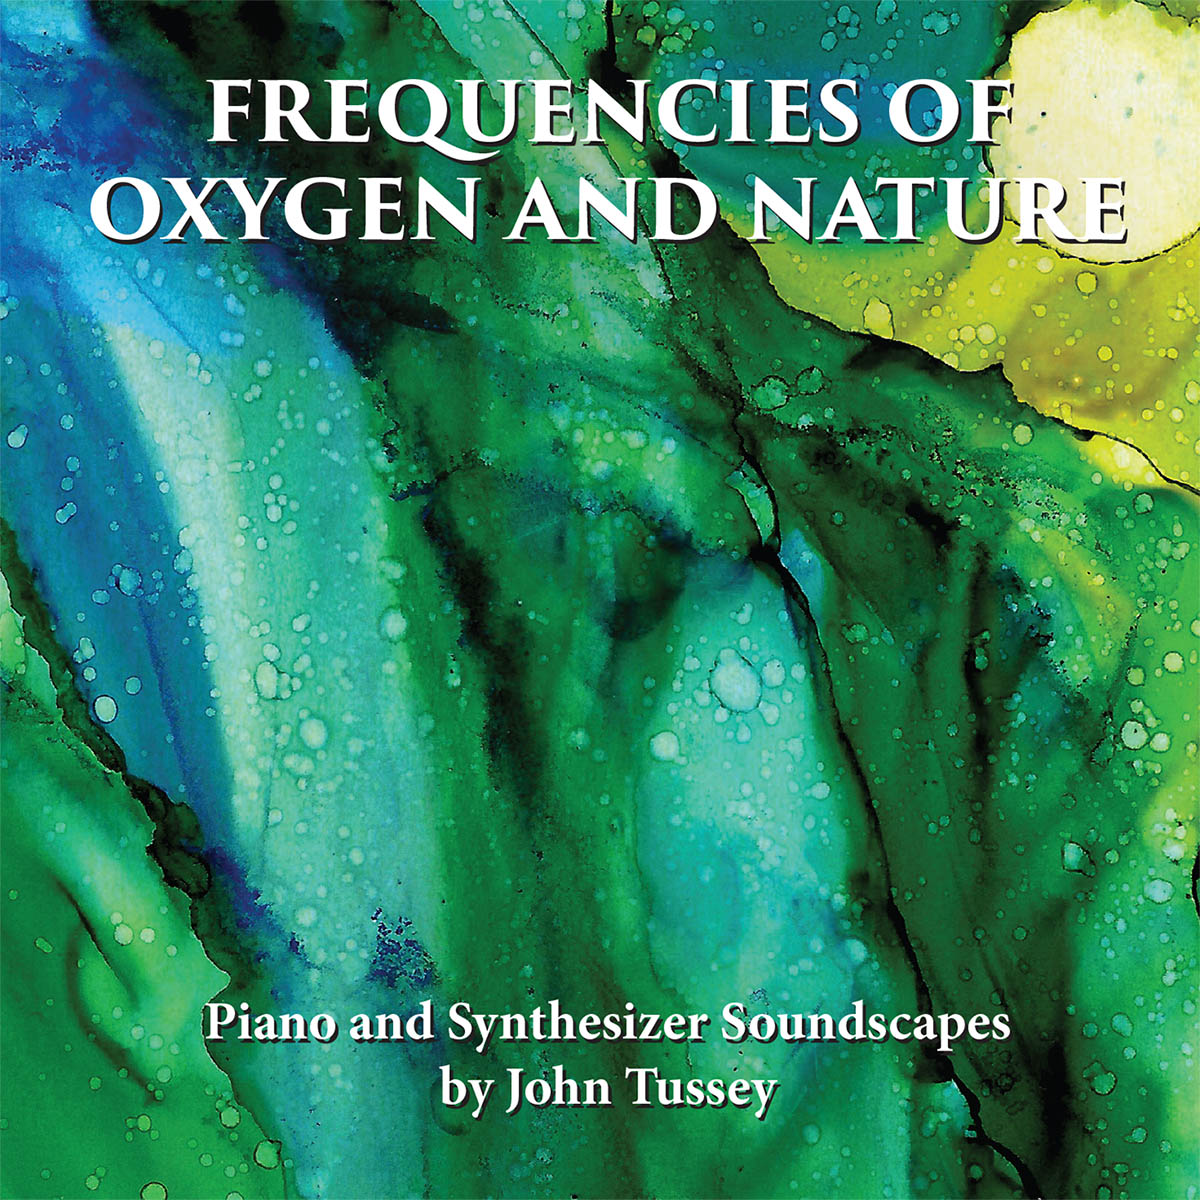 Frequencies of Oxygen and Nature CD